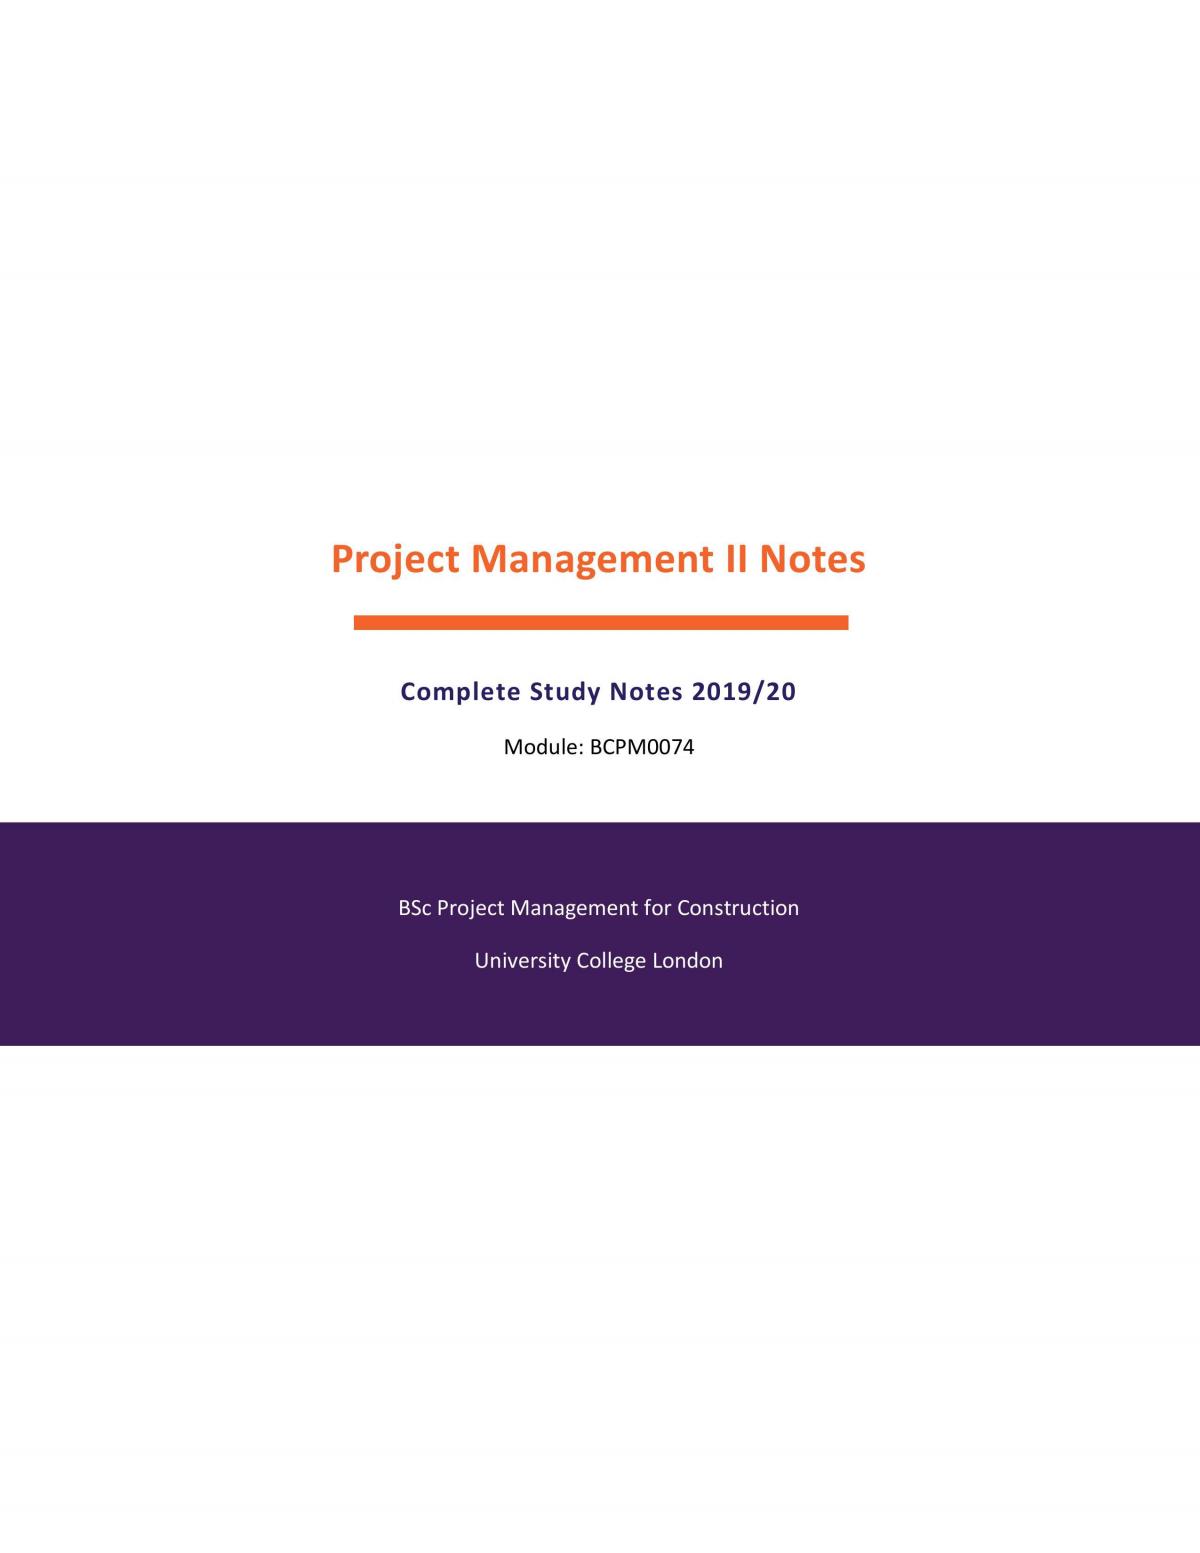 Project Management 2 Complete Study Notes - Page 1